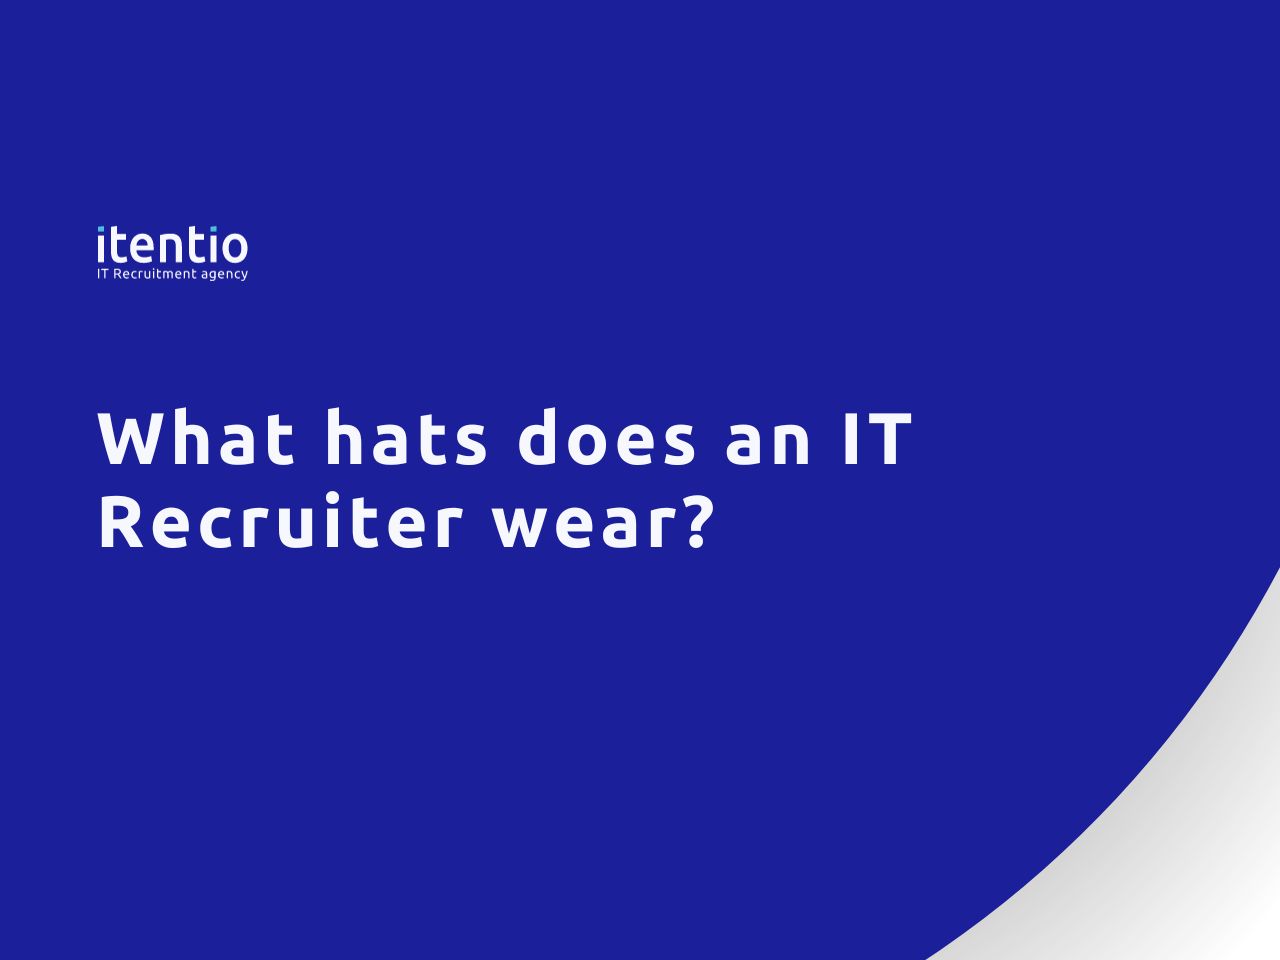 What hats does an IT Recruiter wear